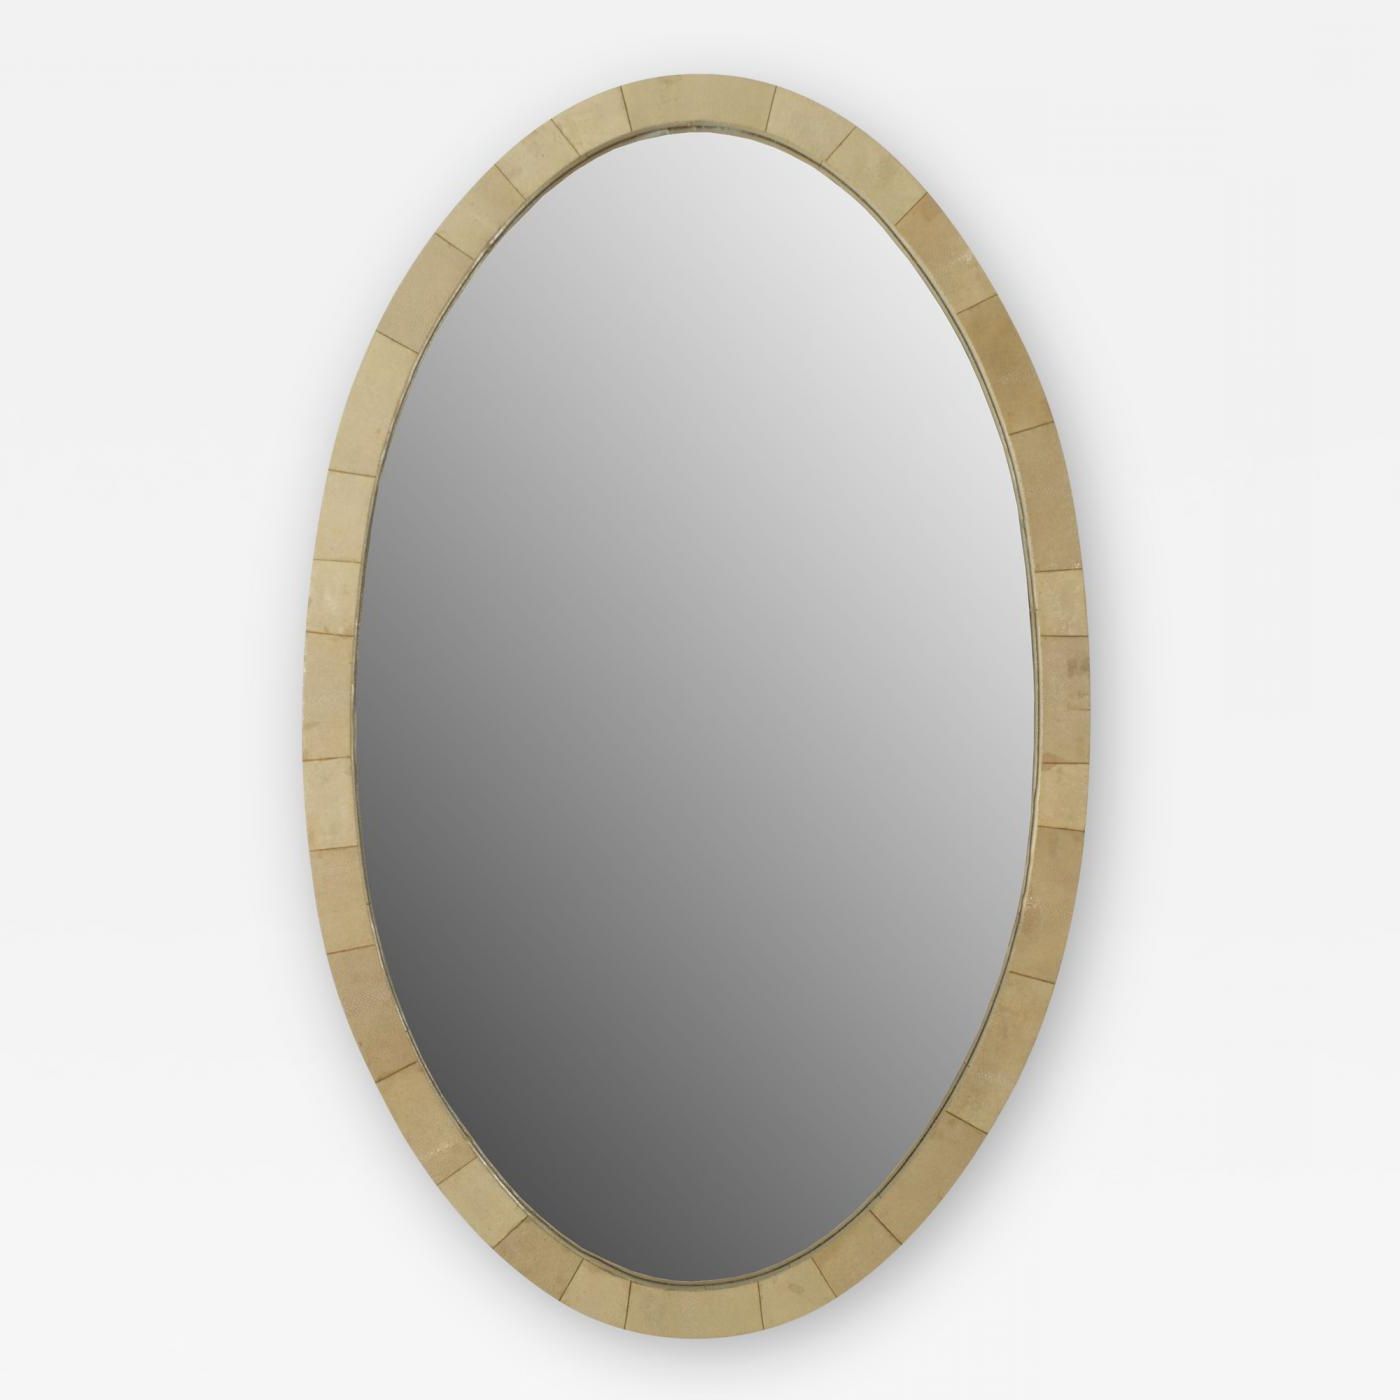 Well Known French Art Deco Large Oval Shaped Cream Colored Shagreen Wall Mirror In Oval Shaped Wall Mirrors (View 3 of 20)